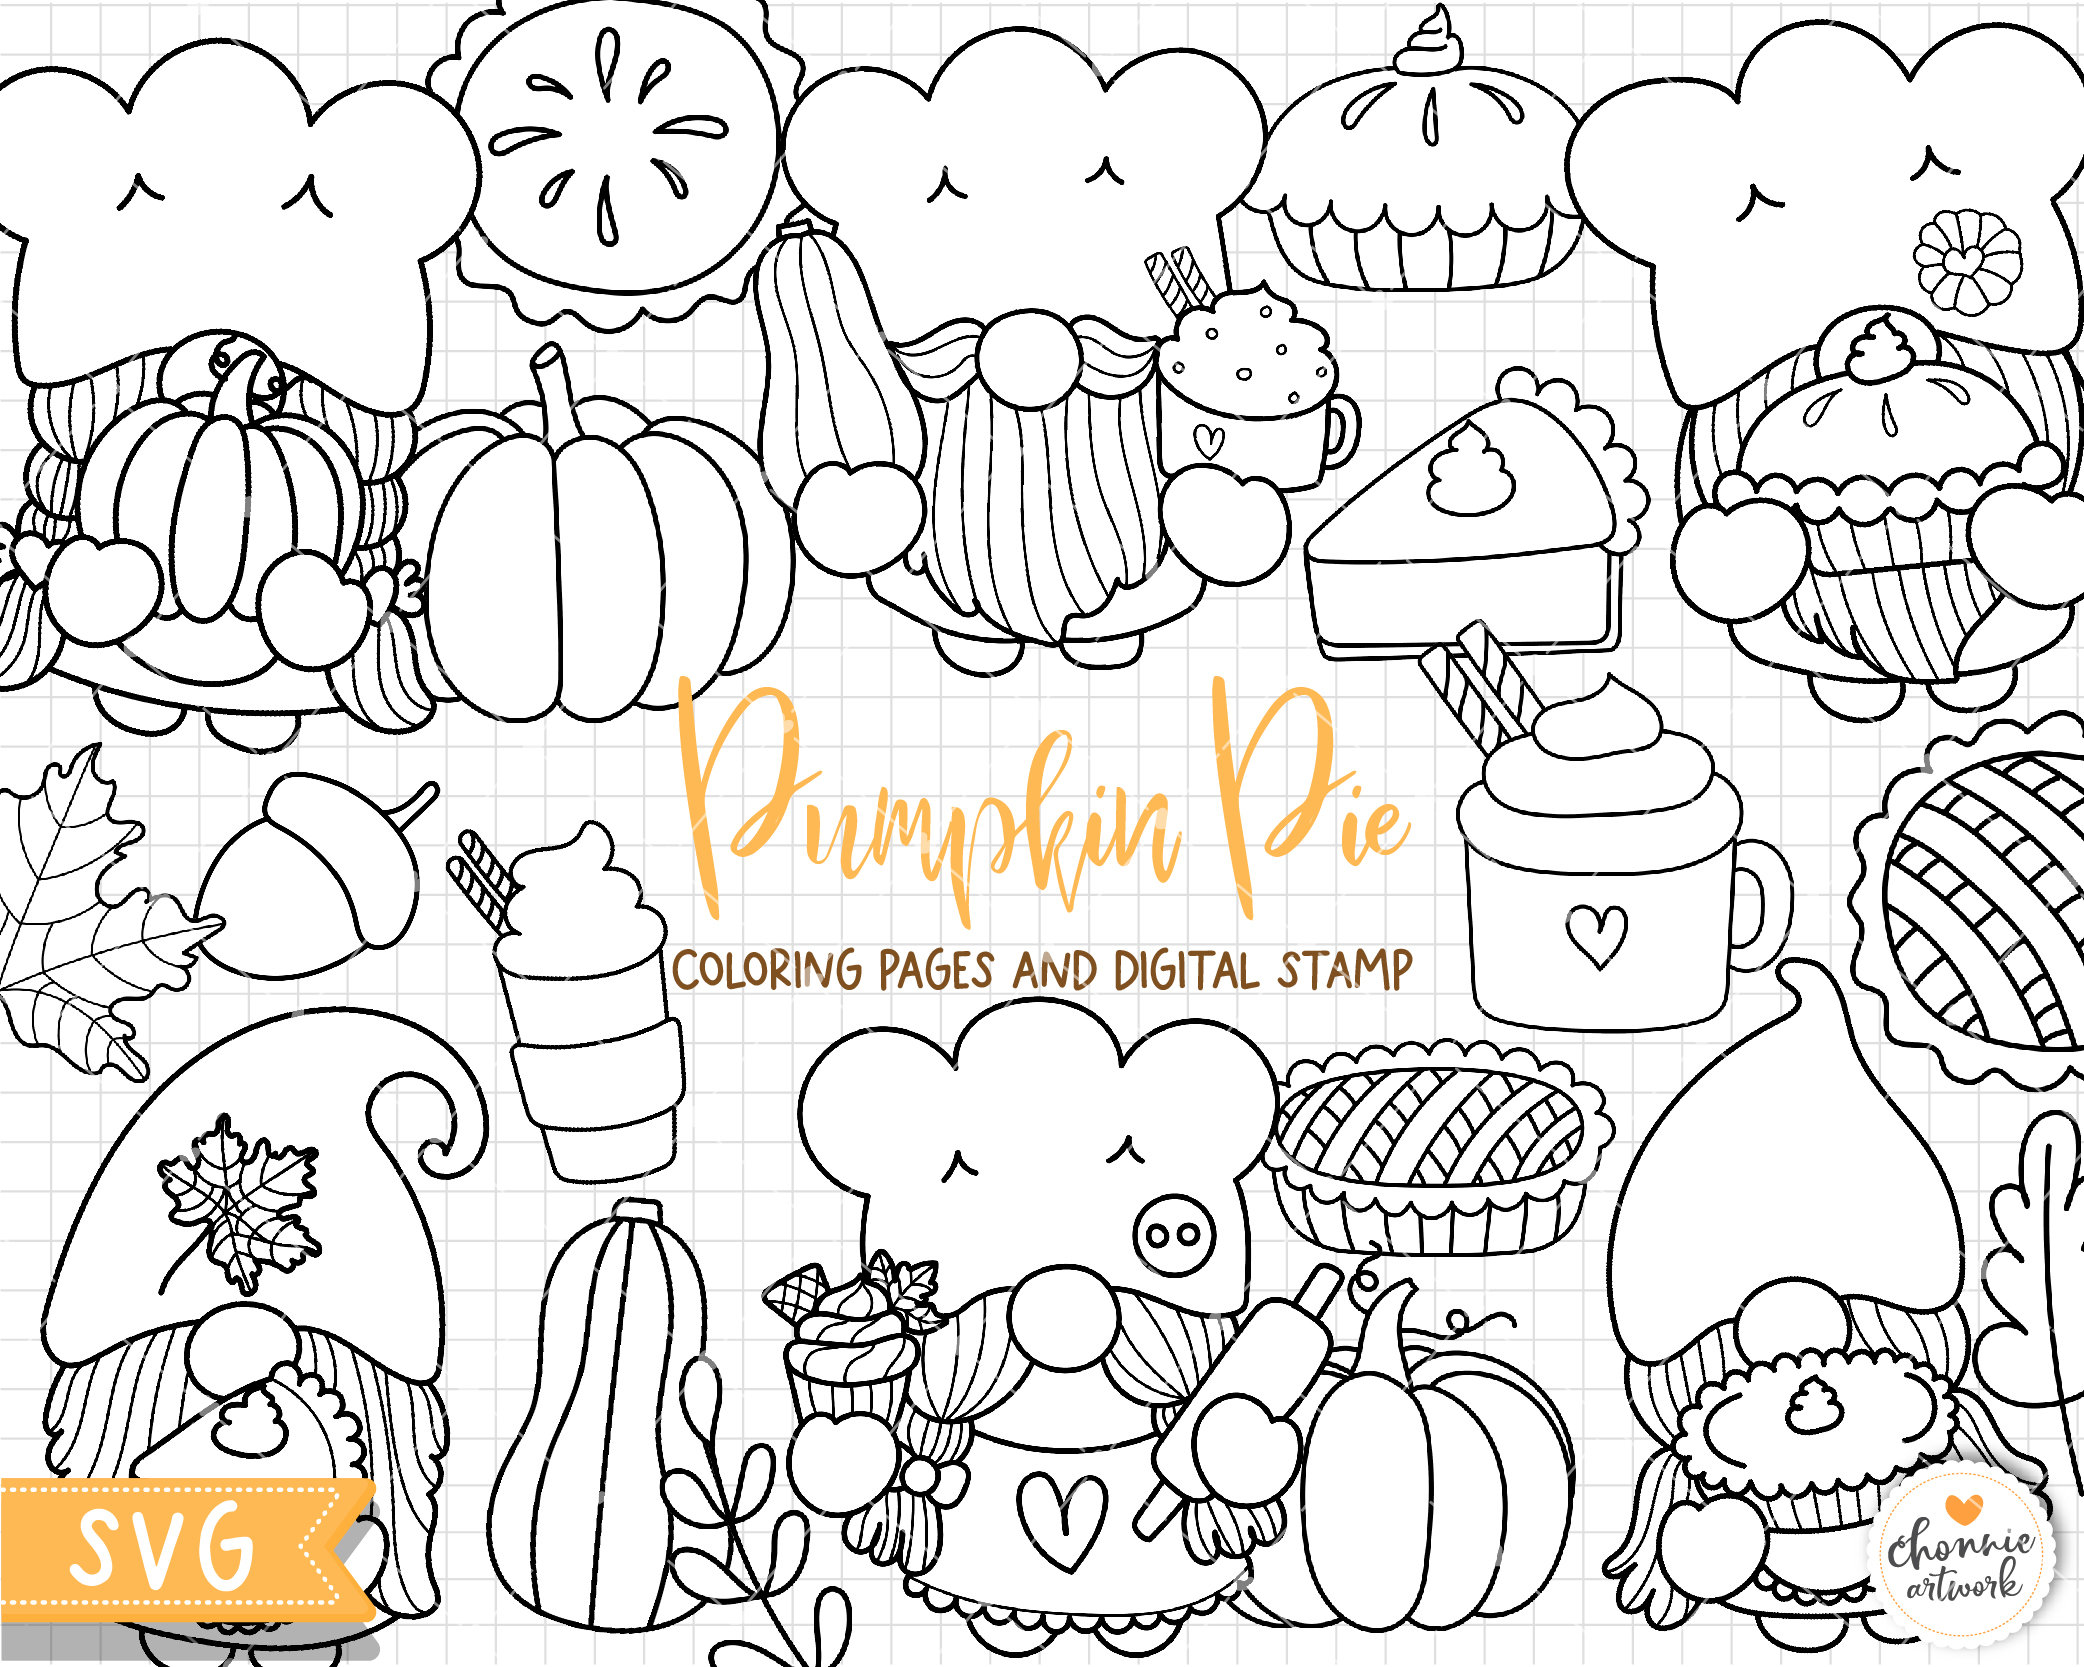 Gnome pumpkin pie coloring pages happy fall gnome digital stamps pumpkin gnome svg pumpkin gnome clipart